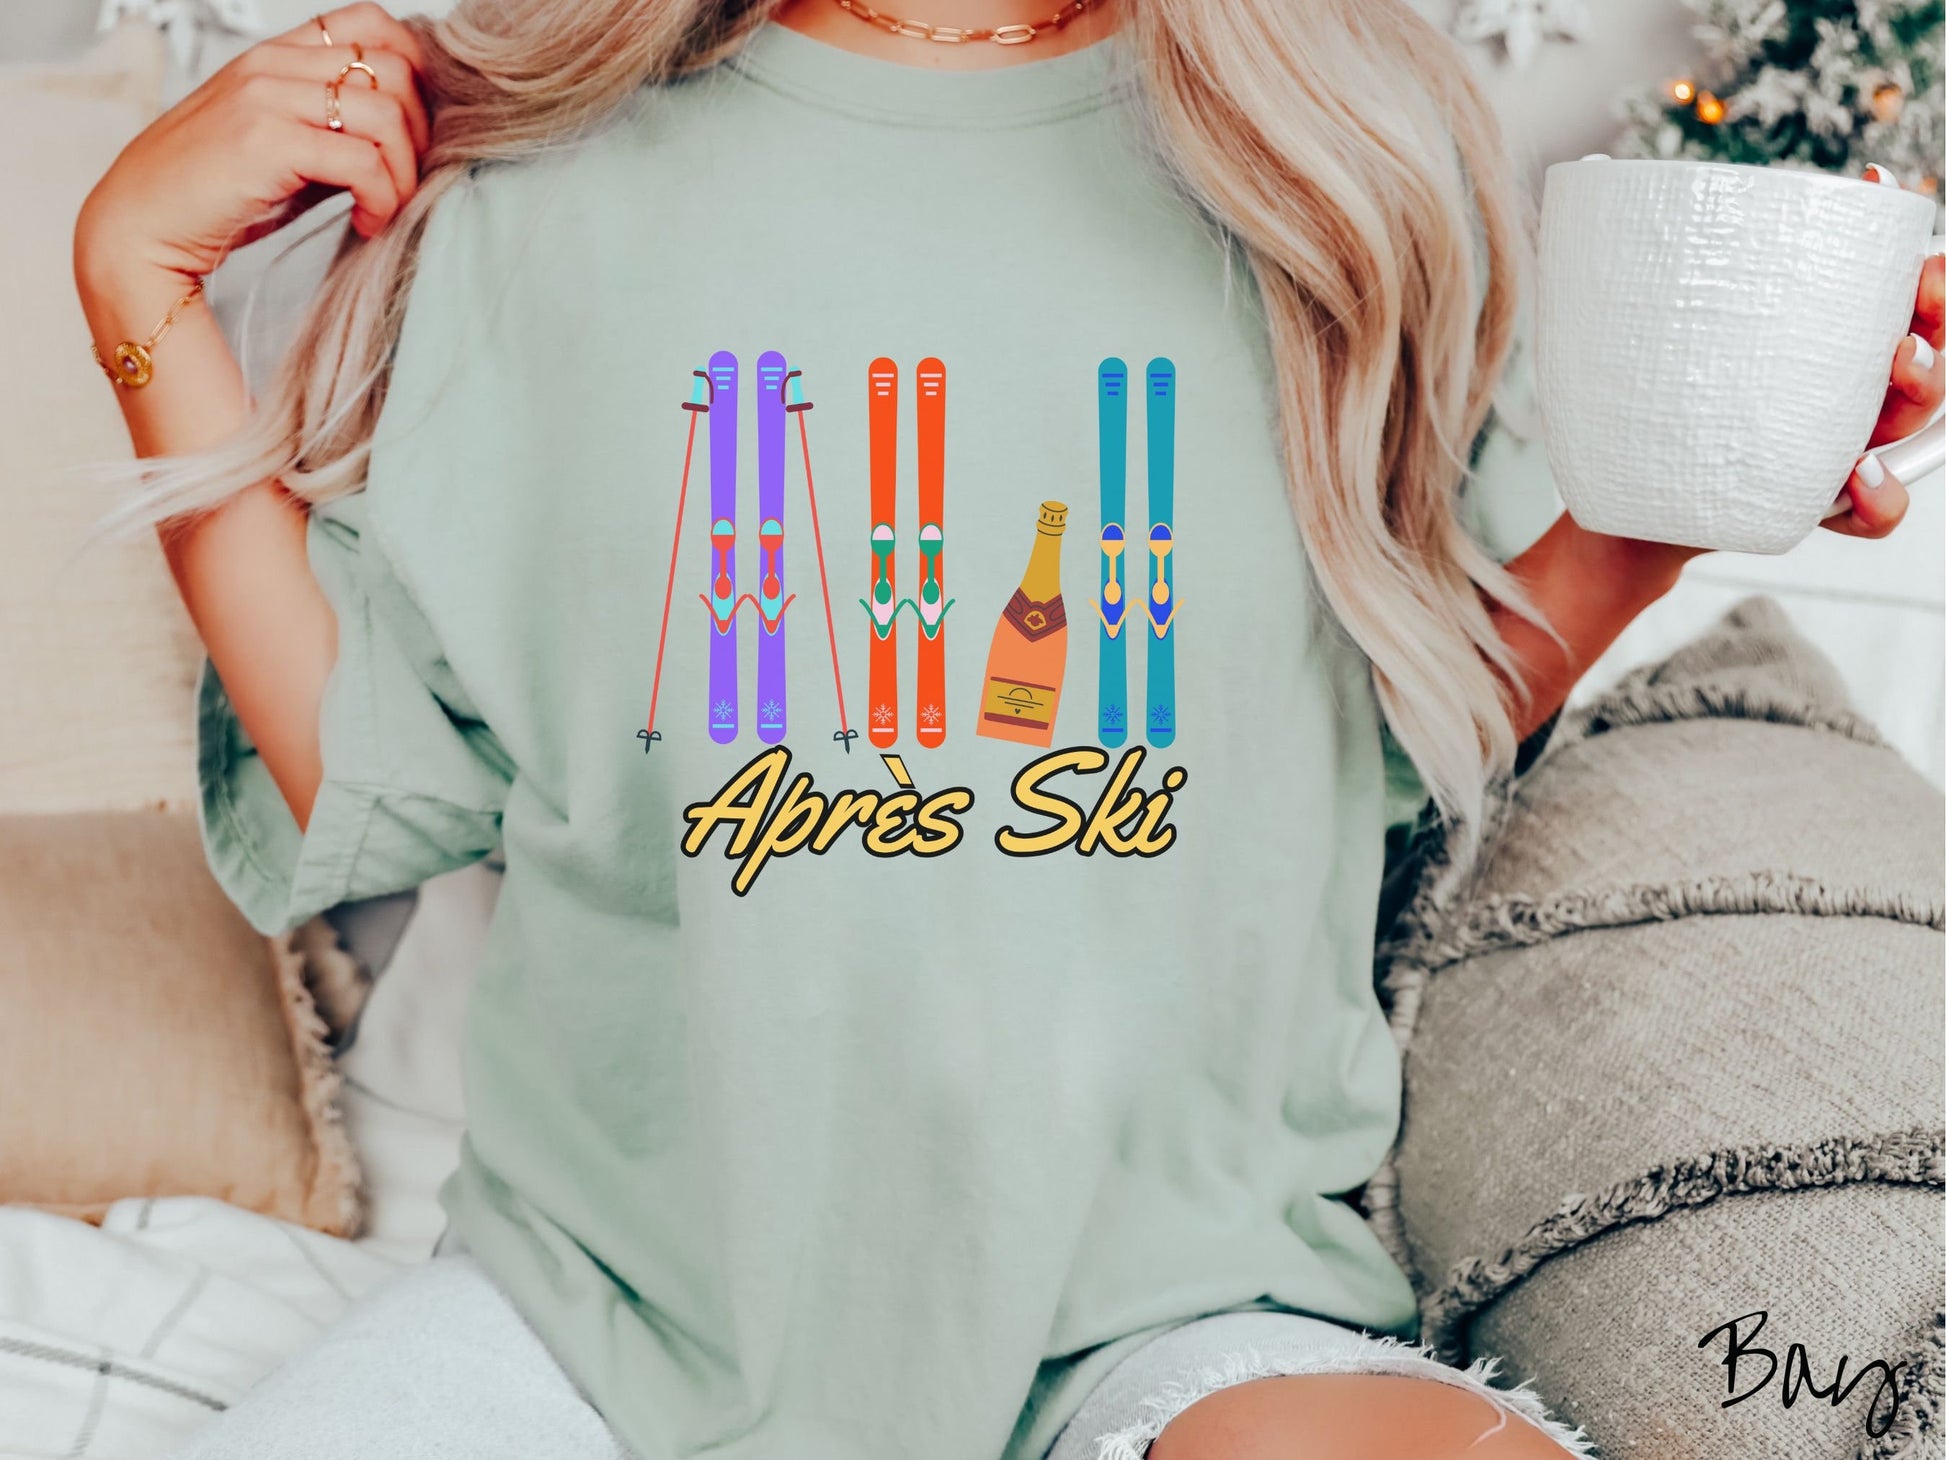 A woman wearing a vintage, bay colored shirt with sets of purple, orange, and turquoise snow skis standing upright, and a big bottle of champagne next to them. Below the skis is the text Apres Ski which is French for After Skiing.